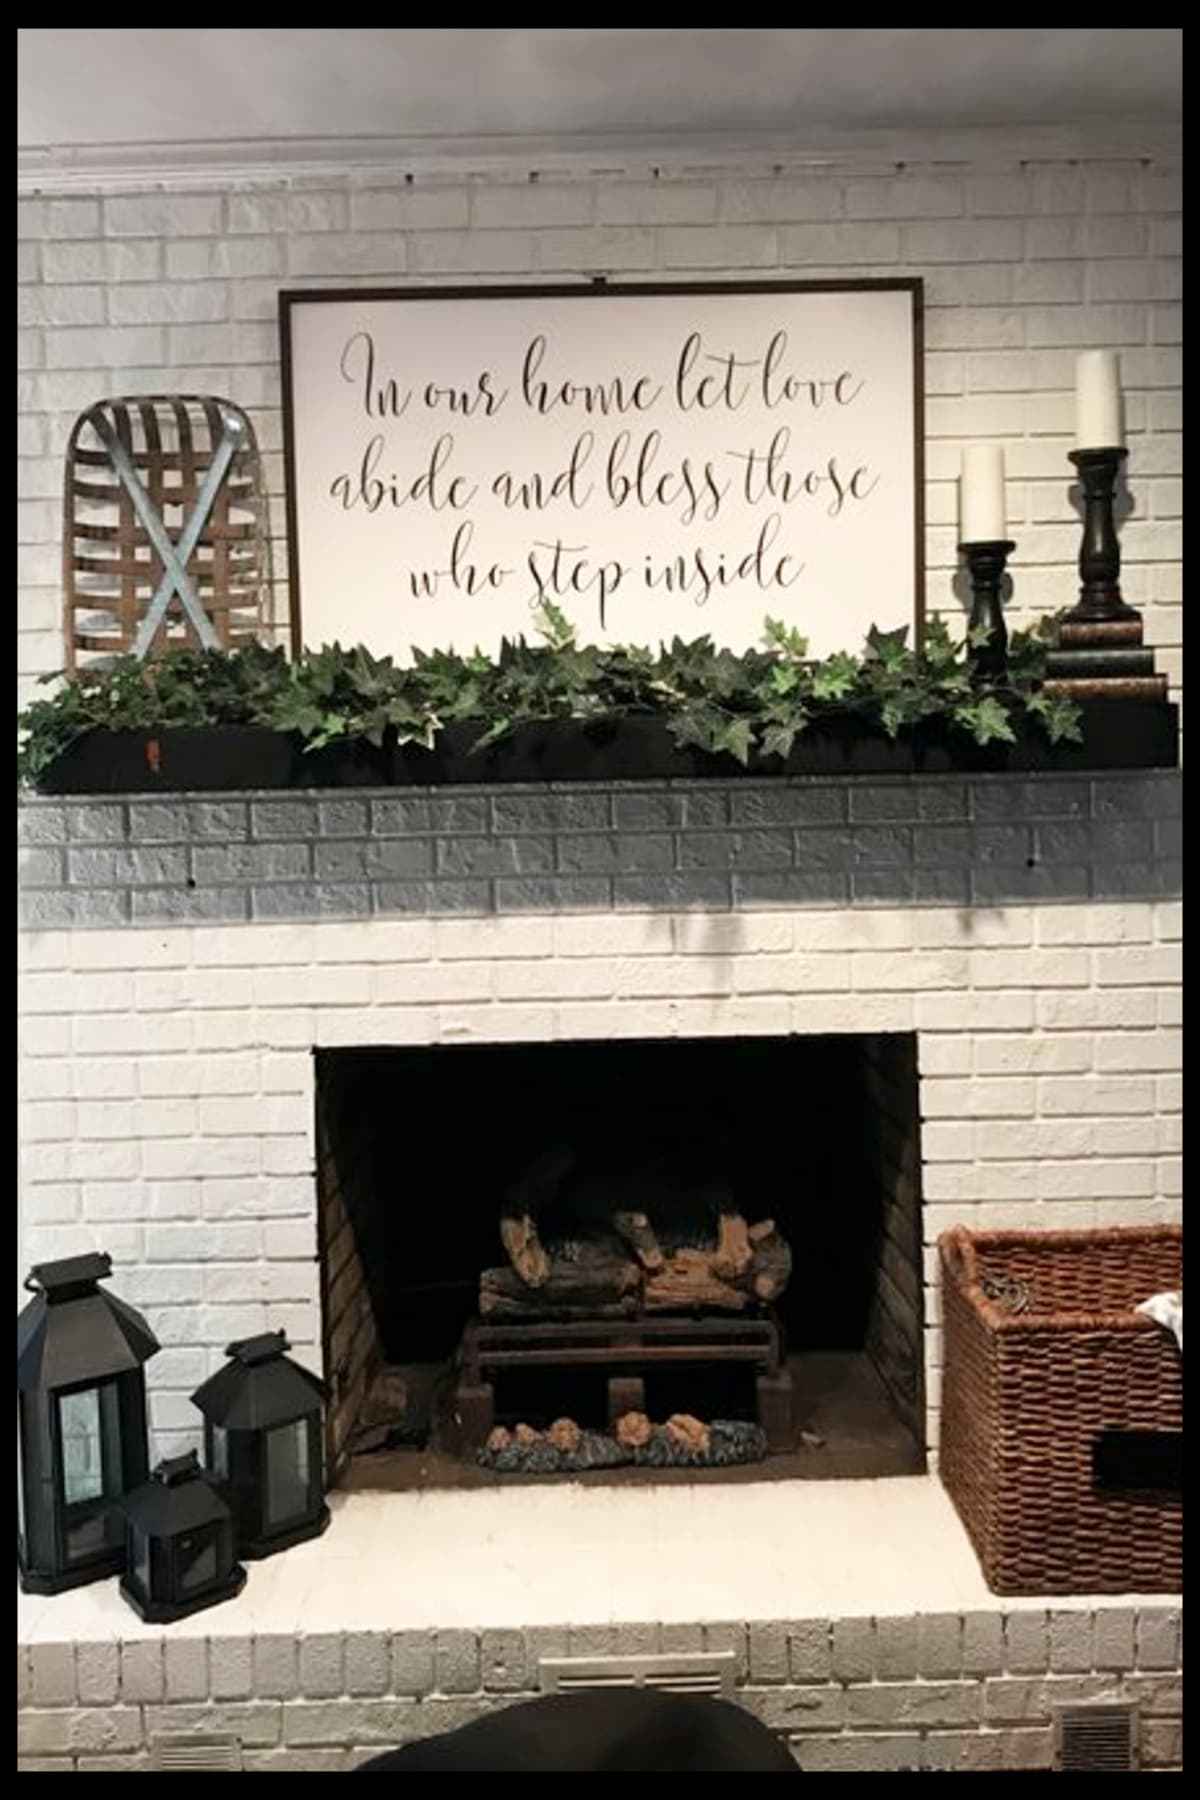 farmhouse fireplace ideas decorated with Pottery Barn decor items, greenery, candles, baskets, rustic wall picture signs and more modern country farmhouse decor